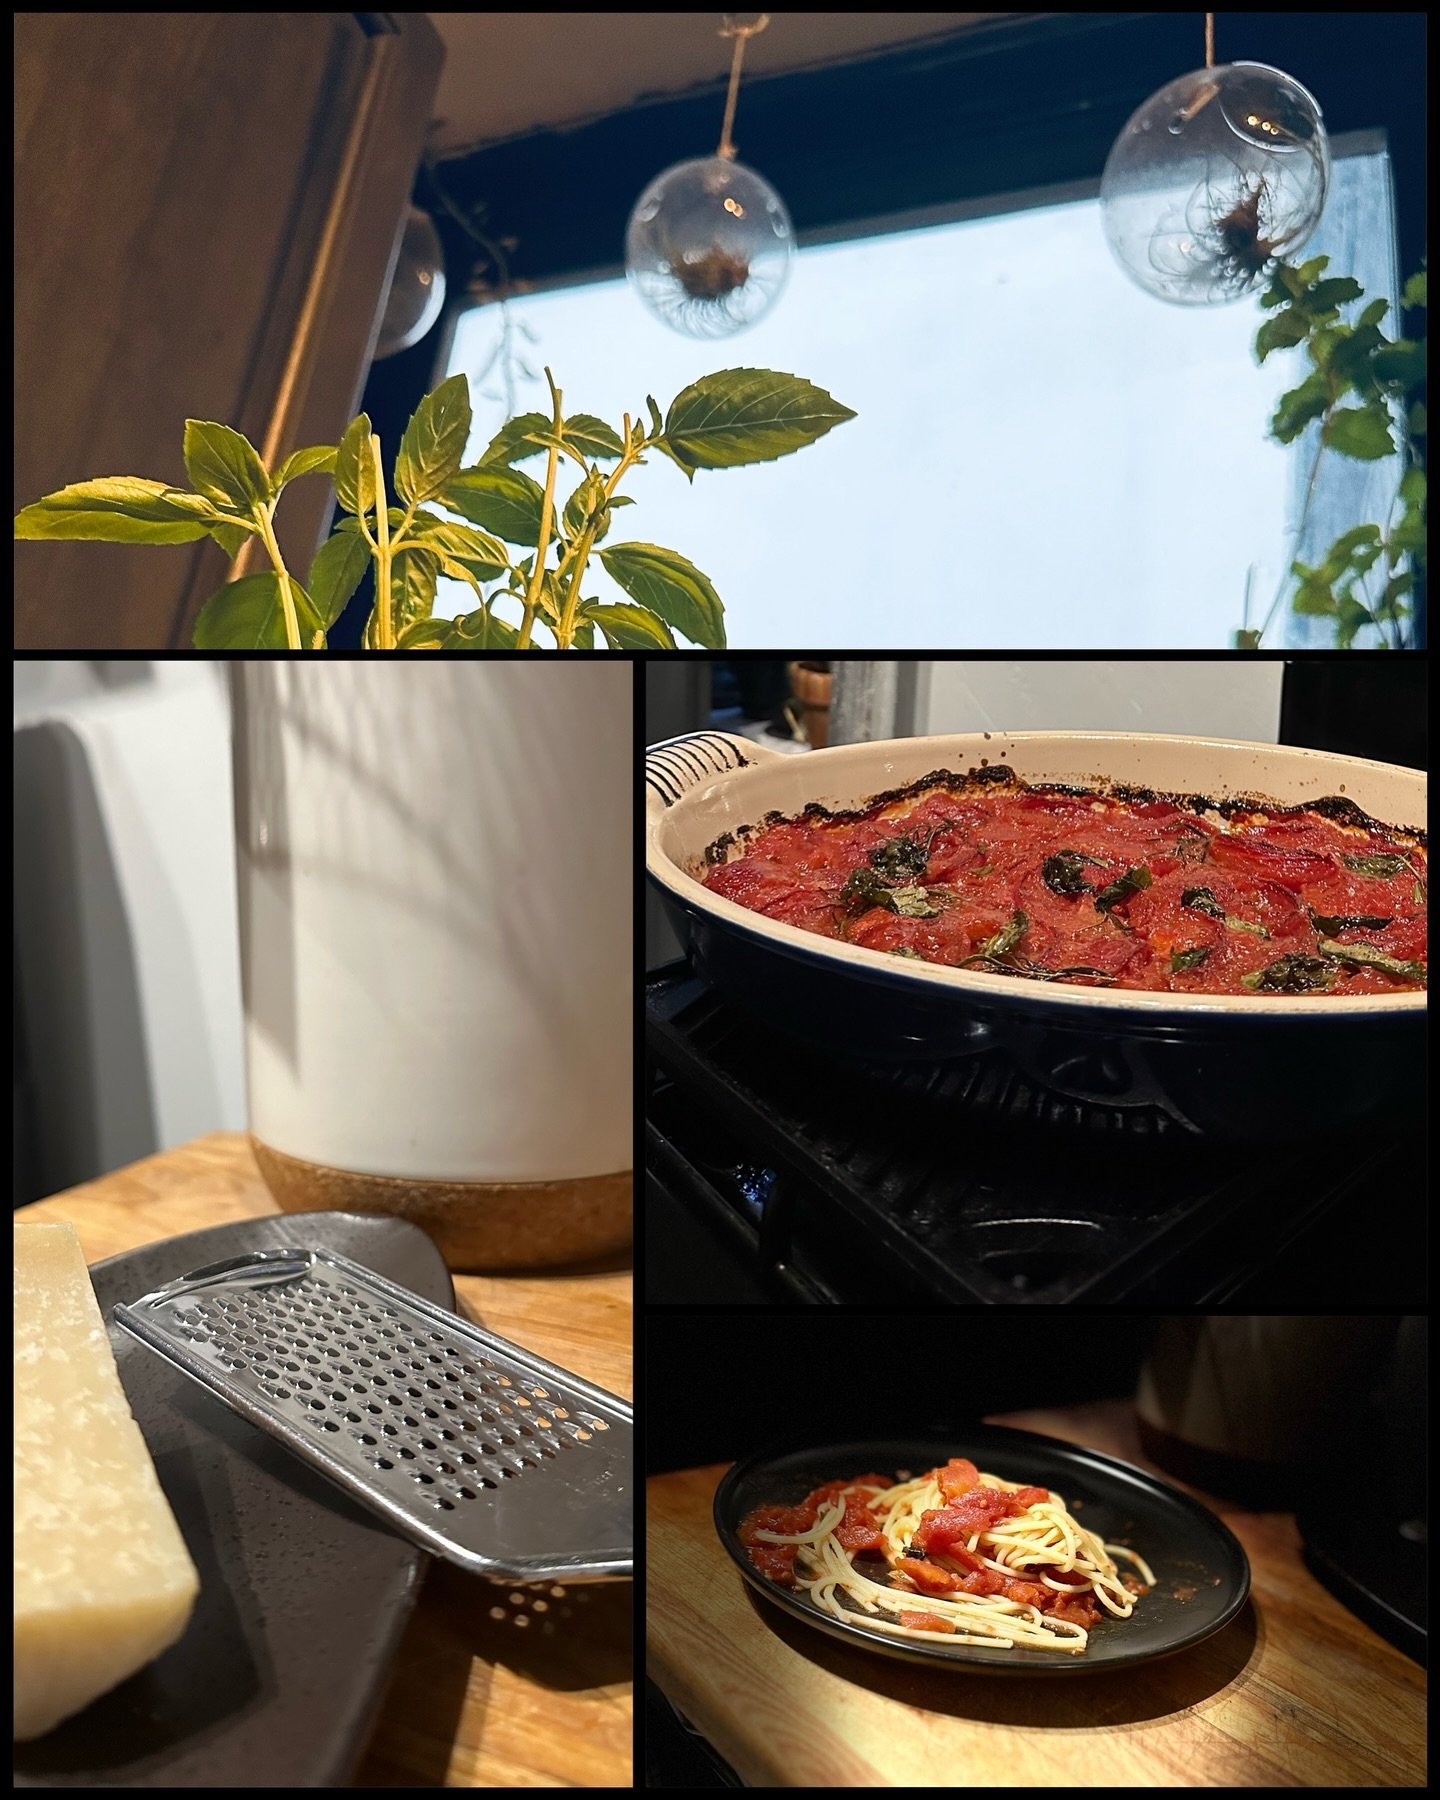 Sometimes you need a big plate of spaghetti. Sunday night / end of weekend (and semester) vibes. Basil from the window garden and slow roasted tomatoes. 

So much fun at the online reading today with Regal spring titles. I always think it&rsquo;s int